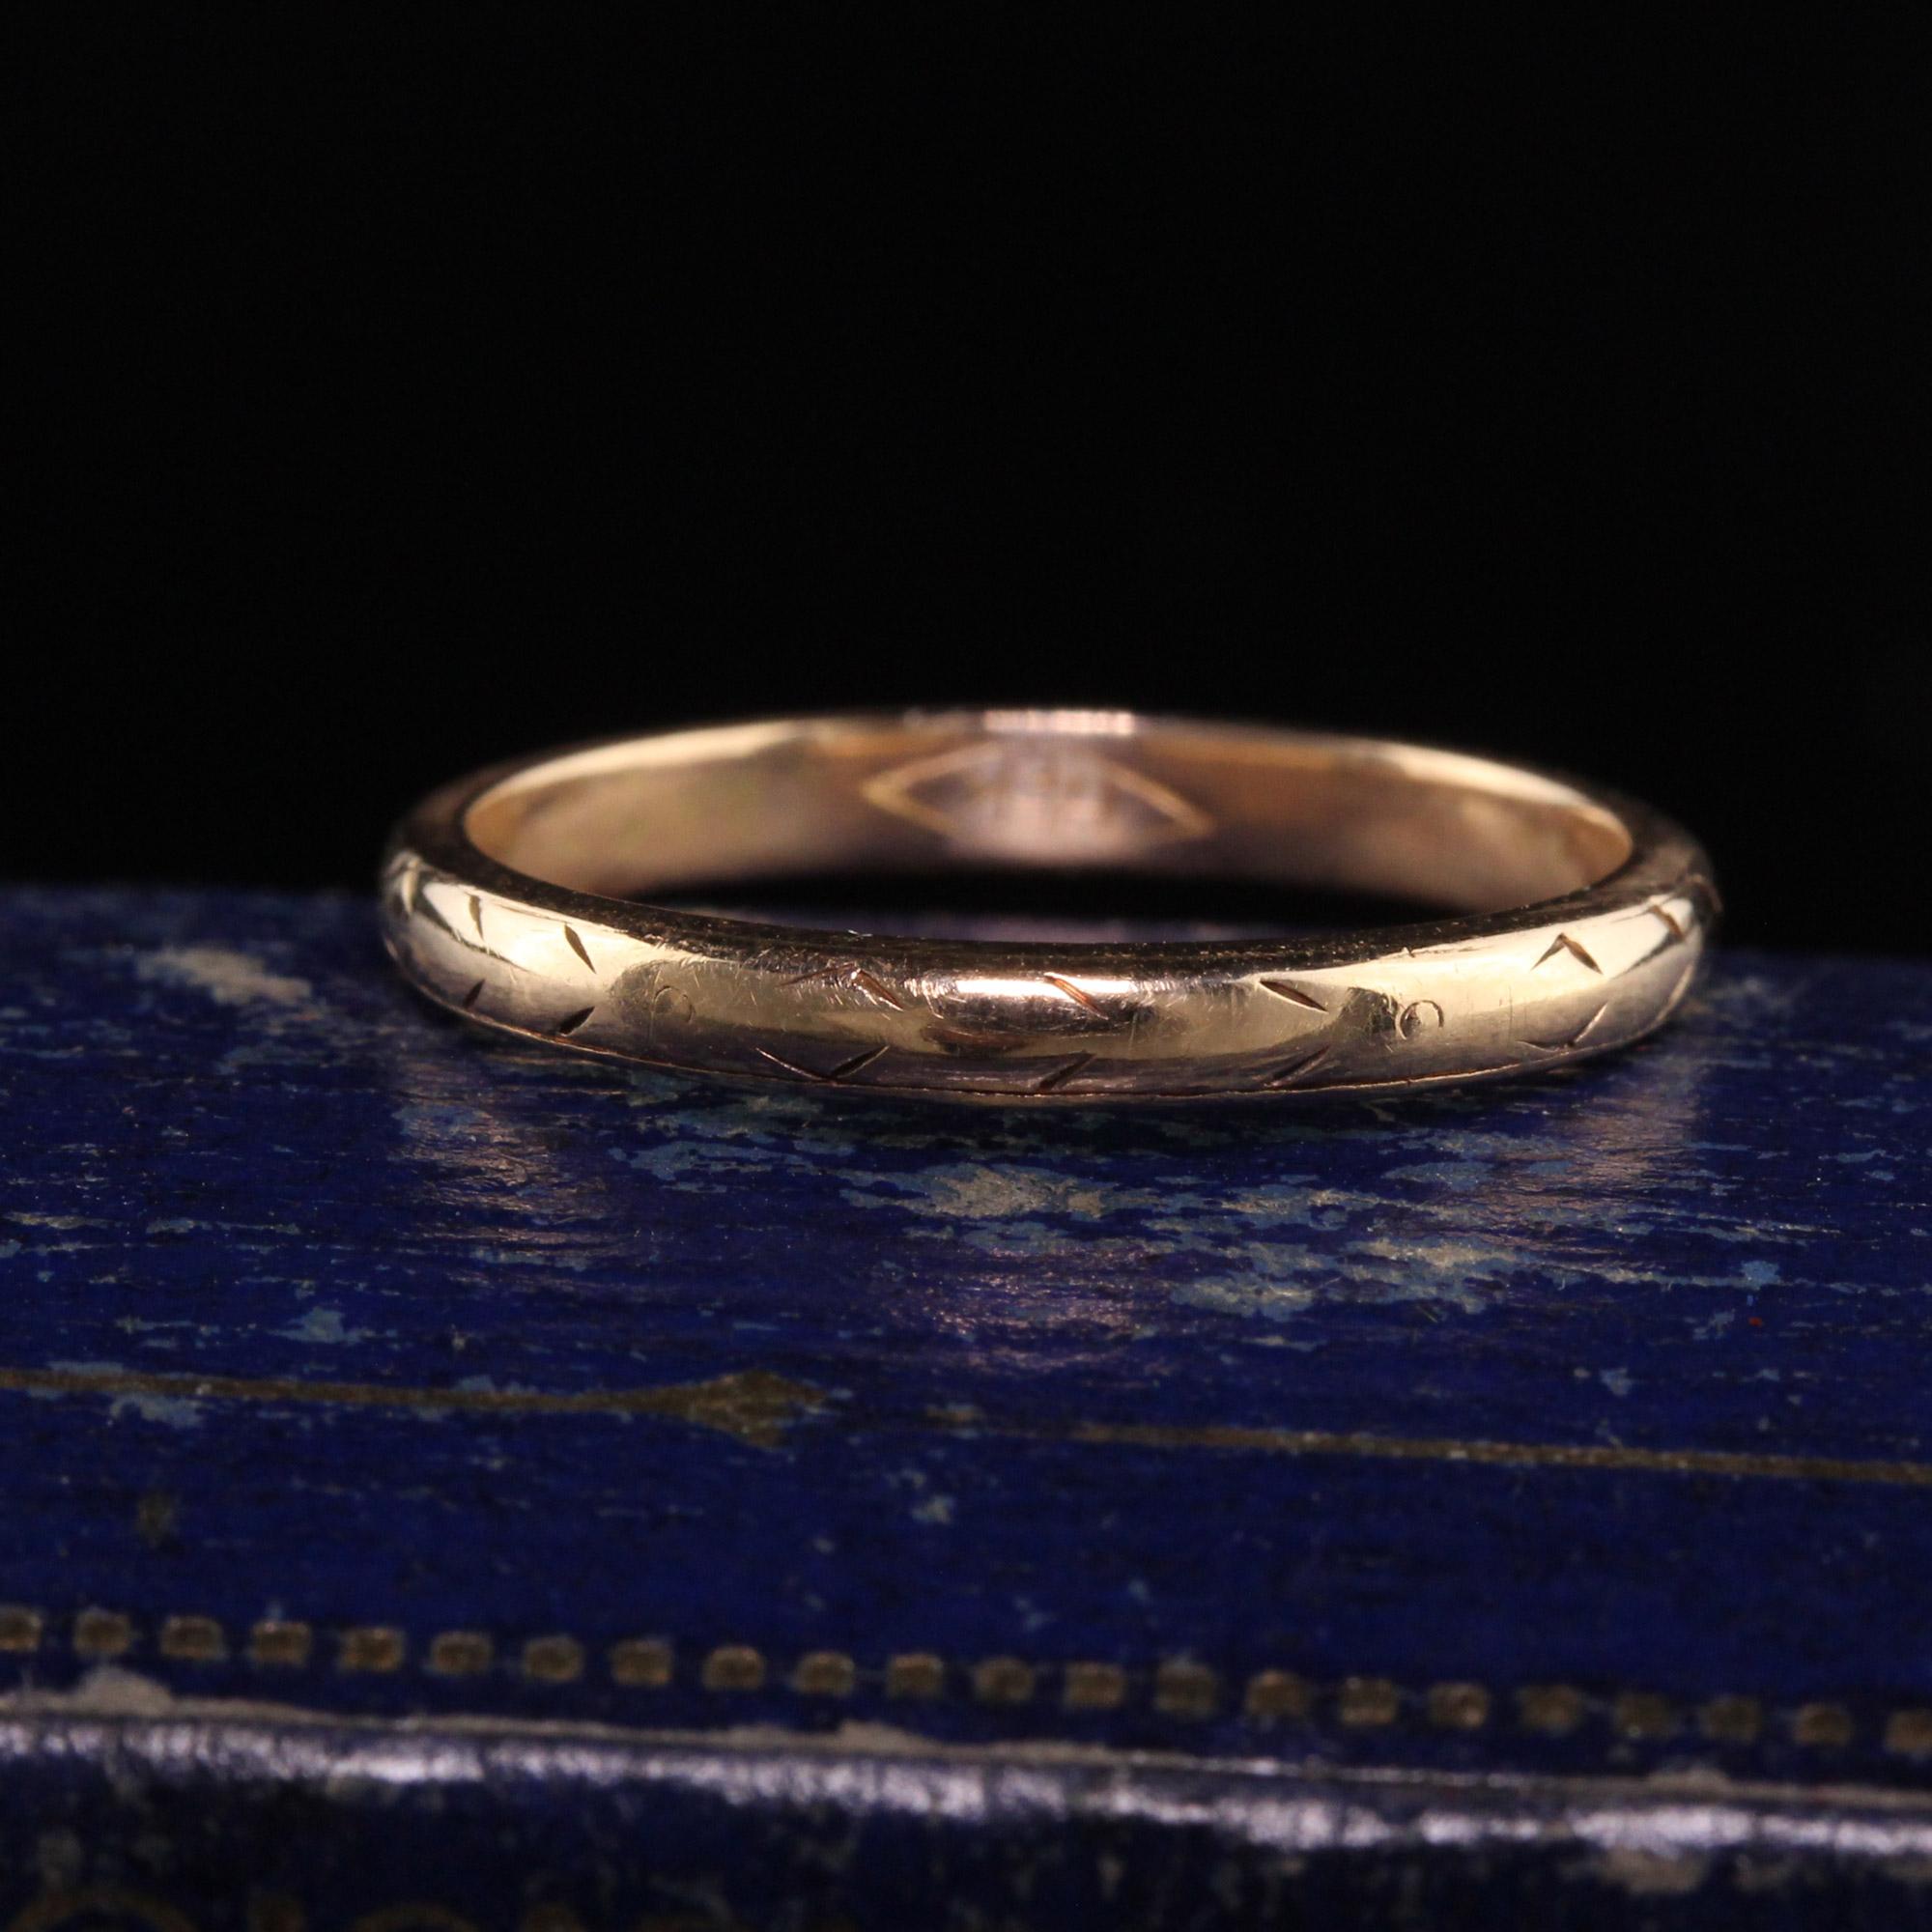 Beautiful Antique Art Deco 14K Yellow Gold Engraved Wedding Band - Size 6. This classic wedding band is in great condition and still has some faint engravings going around the entire band.

Item #R1048

Metal: 14K Yellow Gold

Weight: 2 Grams

Size: